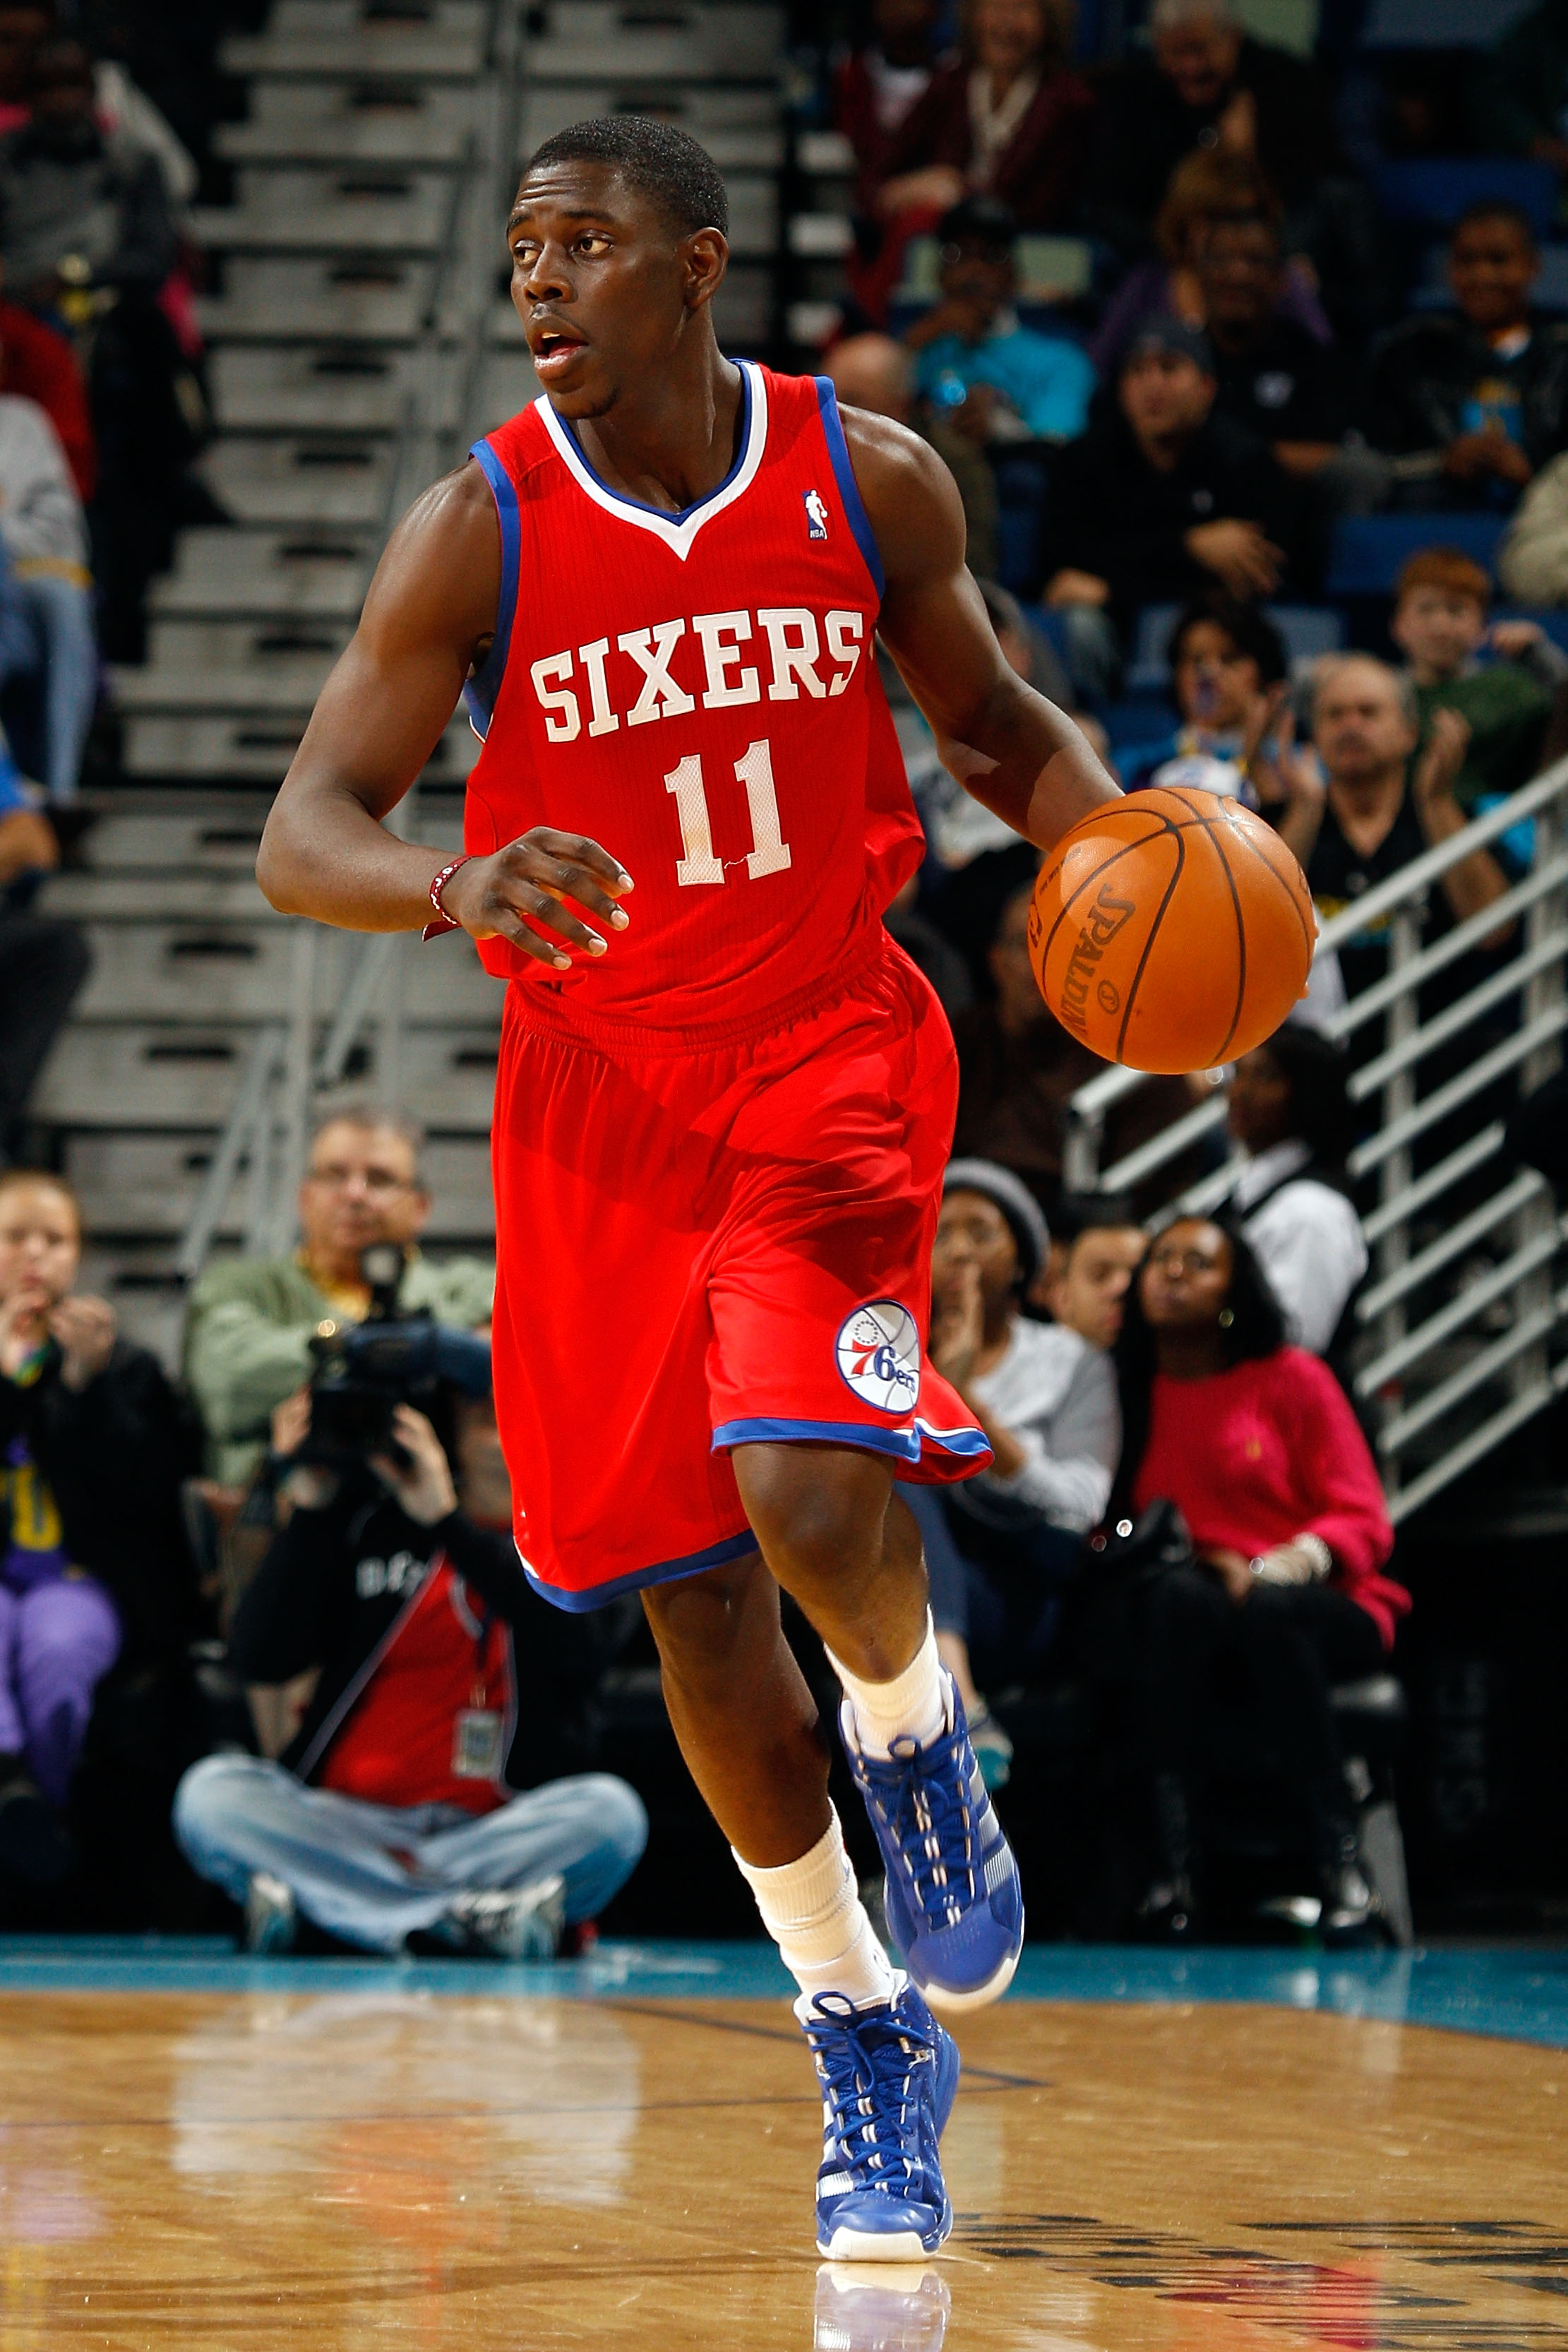 NEW ORLEANS, LA - JANUARY 03:  Jrue Holiday #11 of the Philadelphia 76ers moves the ball against the New Orleans Hornets at New Orleans Arena on January 3, 2011 in New Orleans, Louisiana. NOTE TO USER: User expressly acknowledges and agrees that, by downl